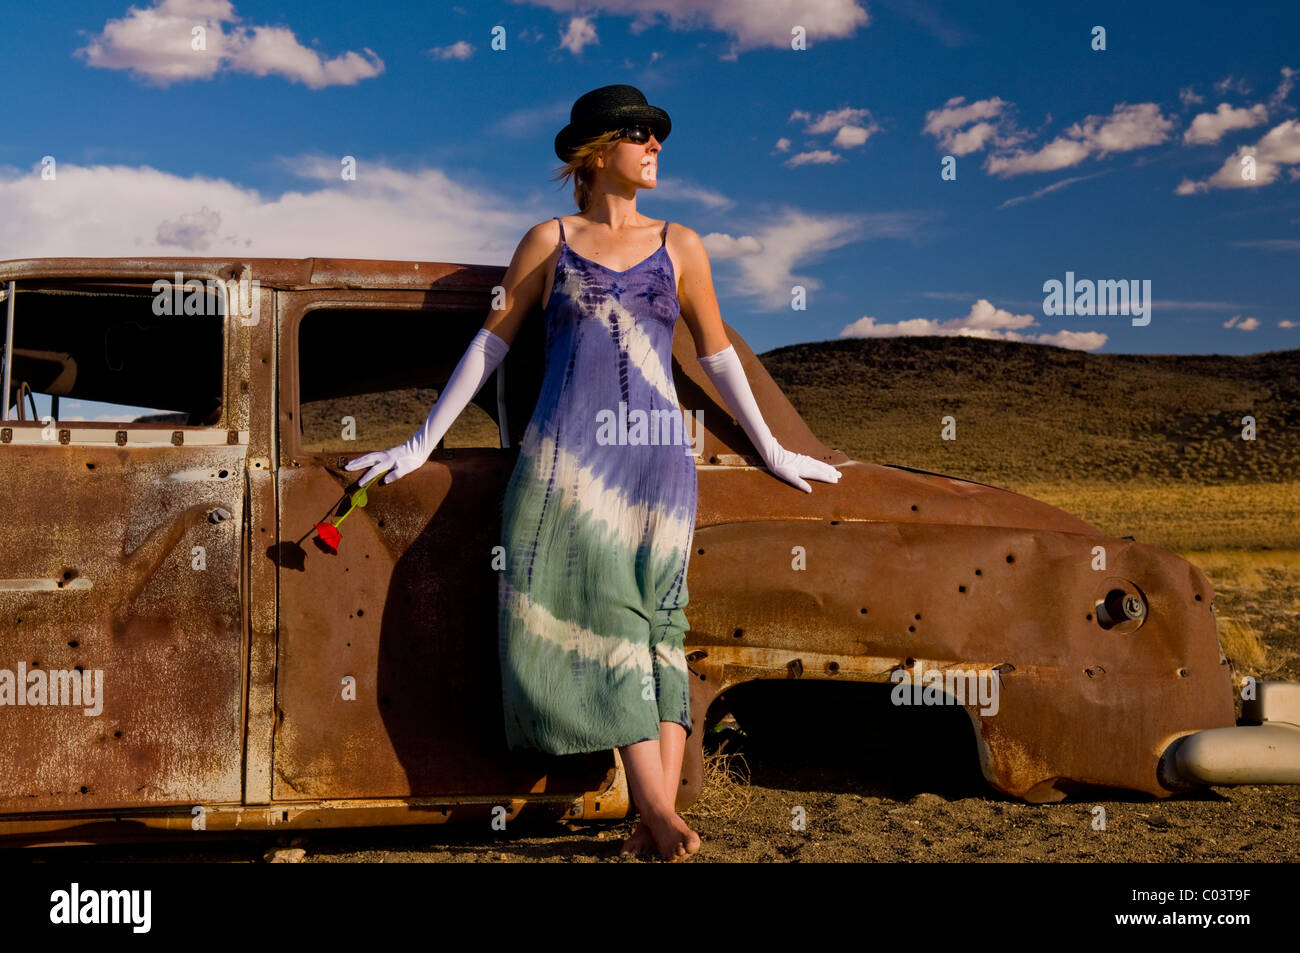 Woman wearing white ballroom gloves, tye died dress, and holding red rose, leans against bullet riddled rusted oid car. Stock Photo